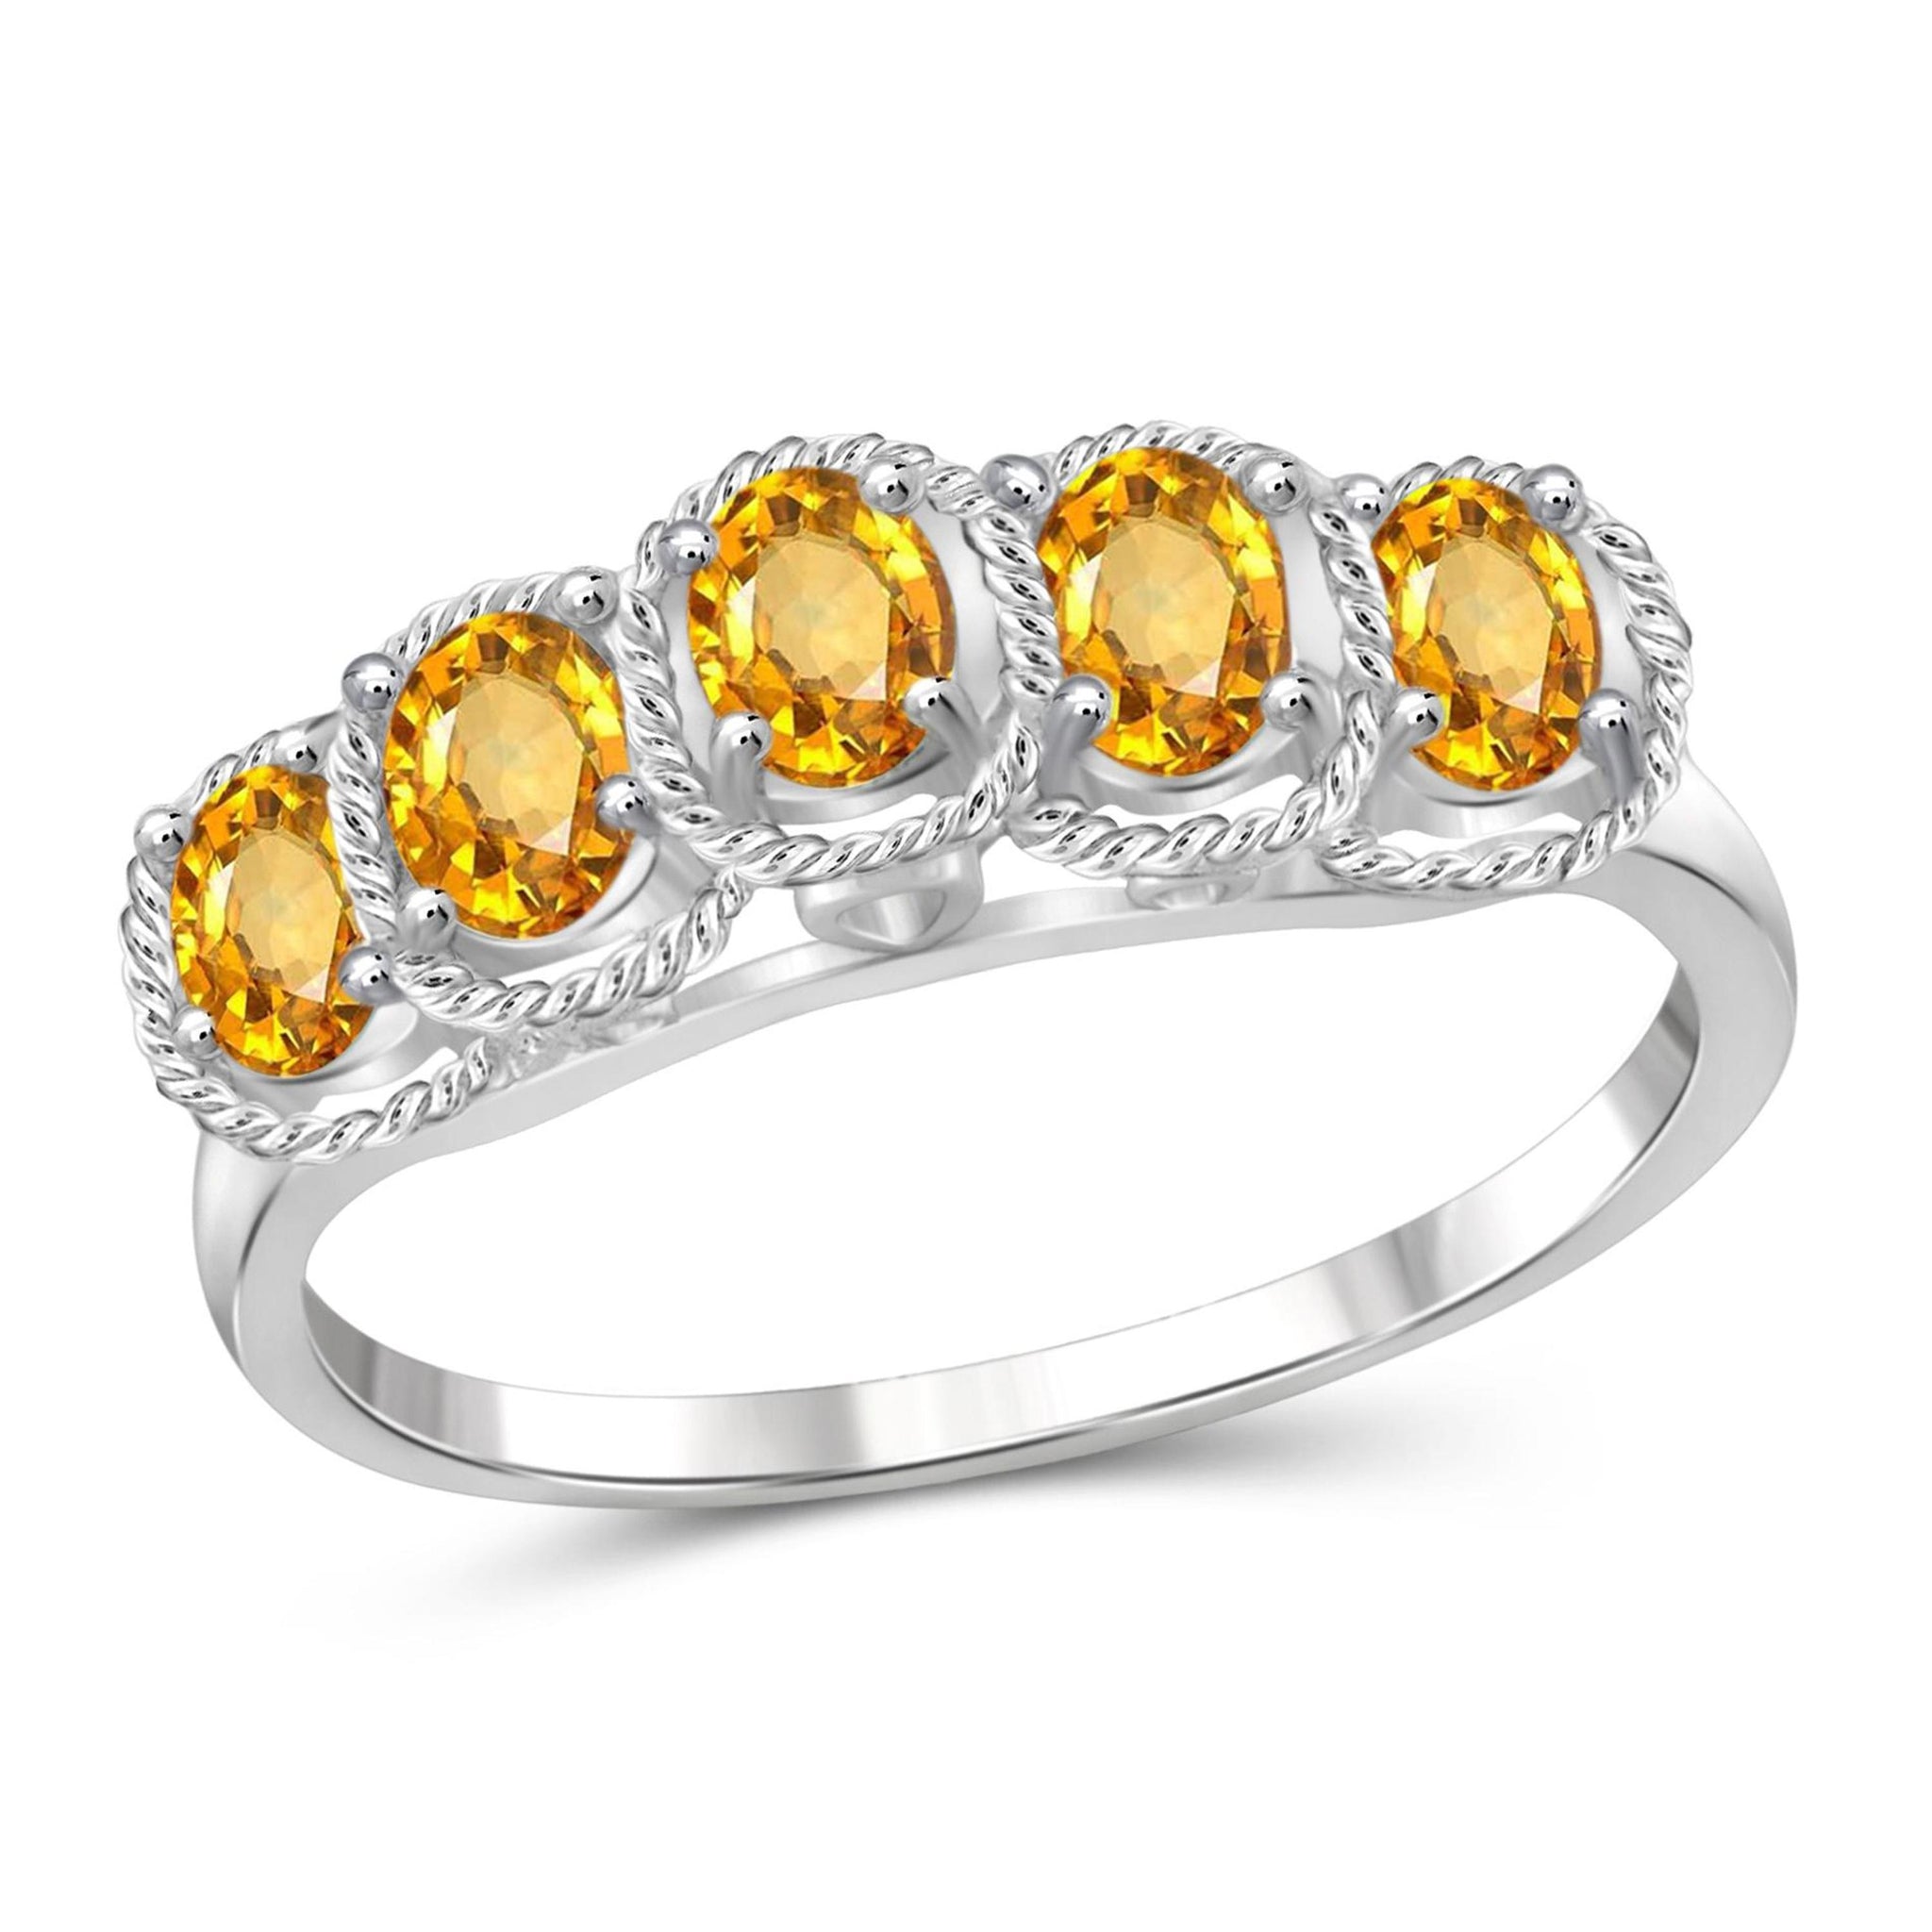 JewelonFire 1.00 Carat T.G.W. Citrine Sterling Silver Ring - Assorted Colors